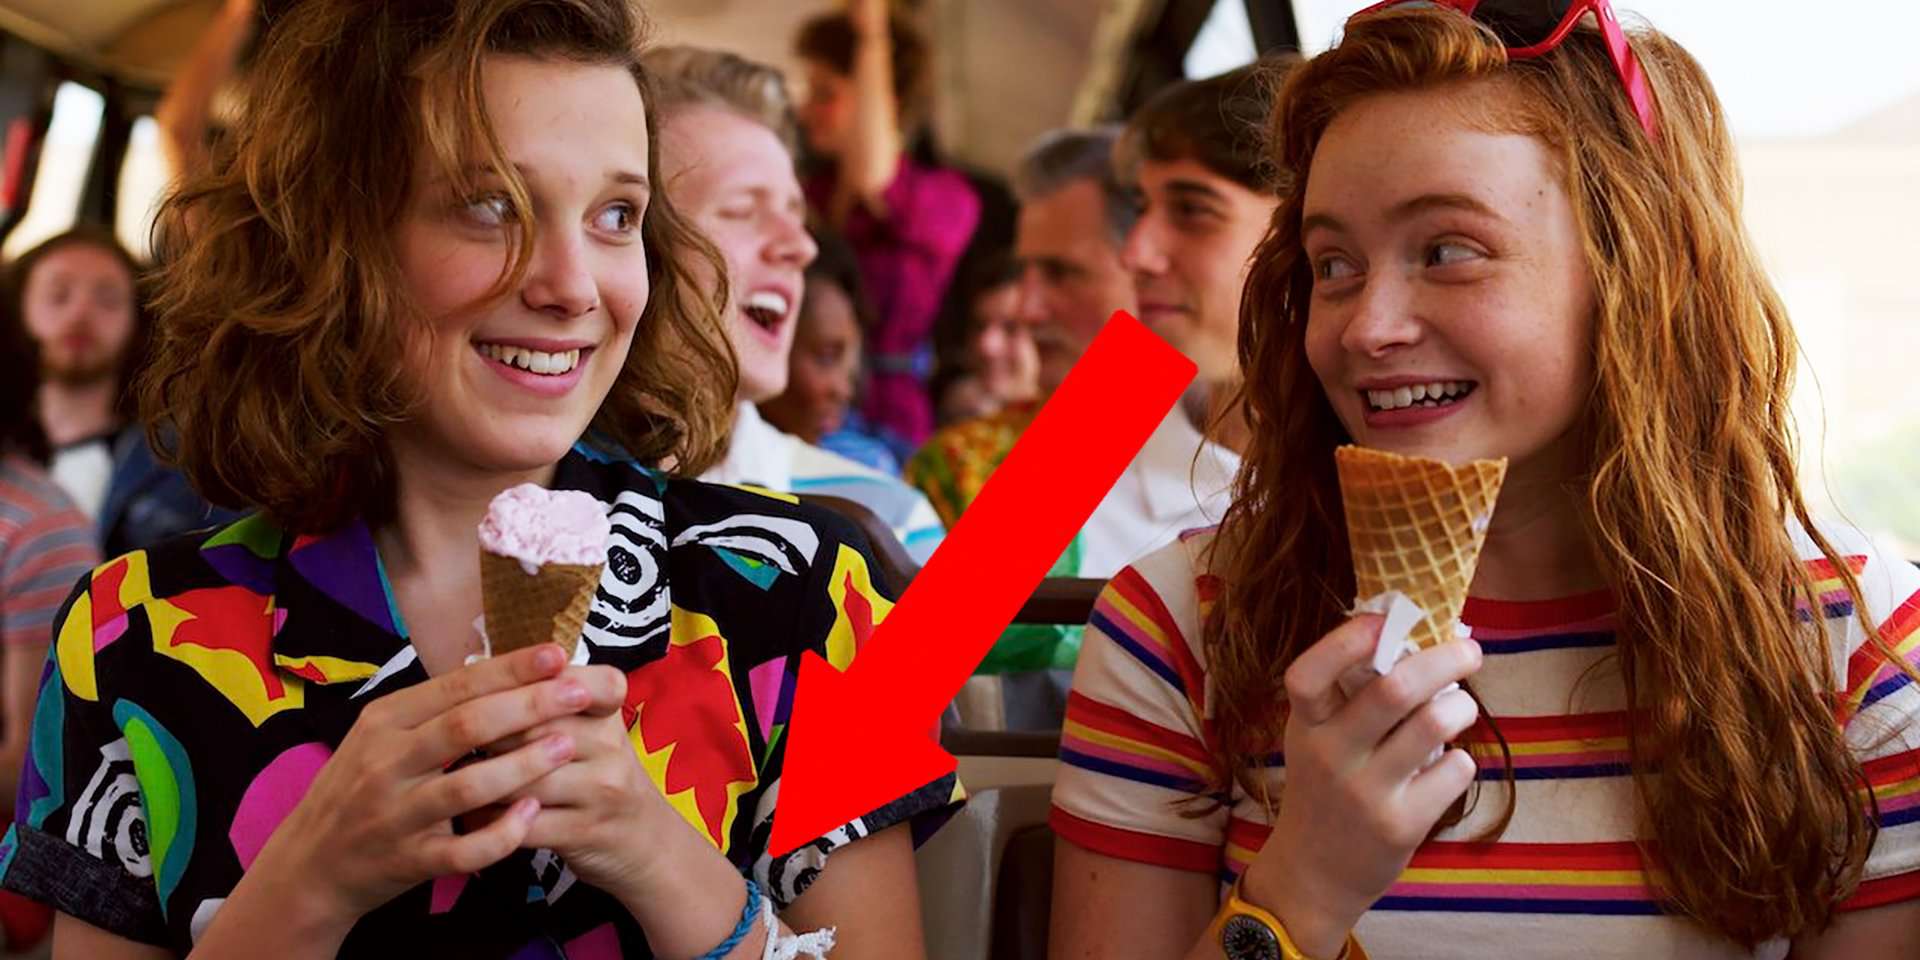 Taboola Ad Example 65651 - All The Details You Missed In The 'Stranger Things' Season 3 Trailer